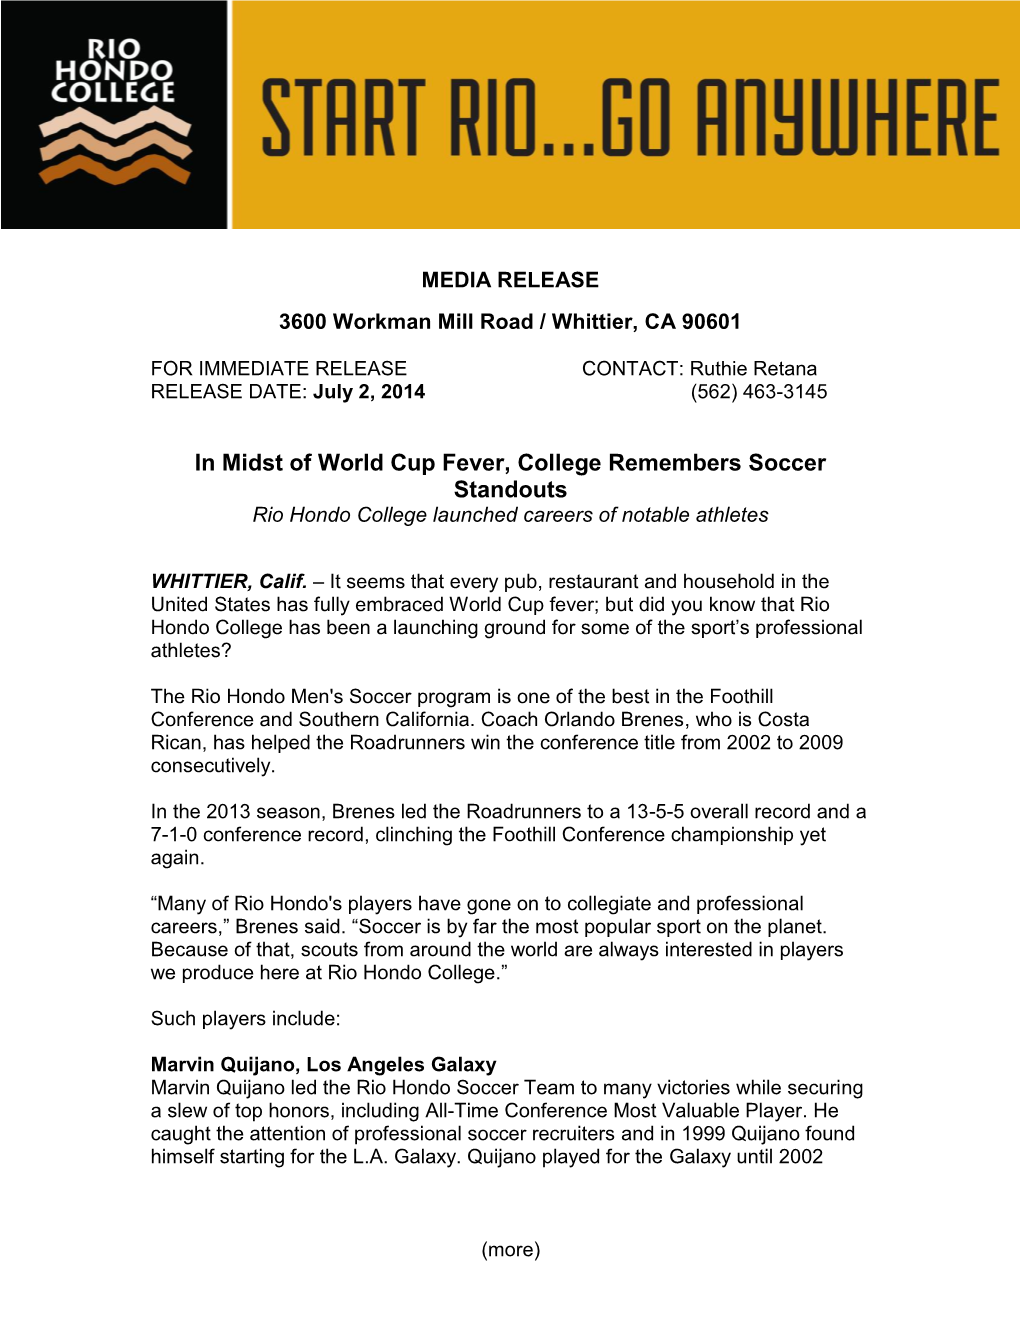 In Midst of World Cup Fever, College Remembers Soccer Standouts Rio Hondo College Launched Careers of Notable Athletes